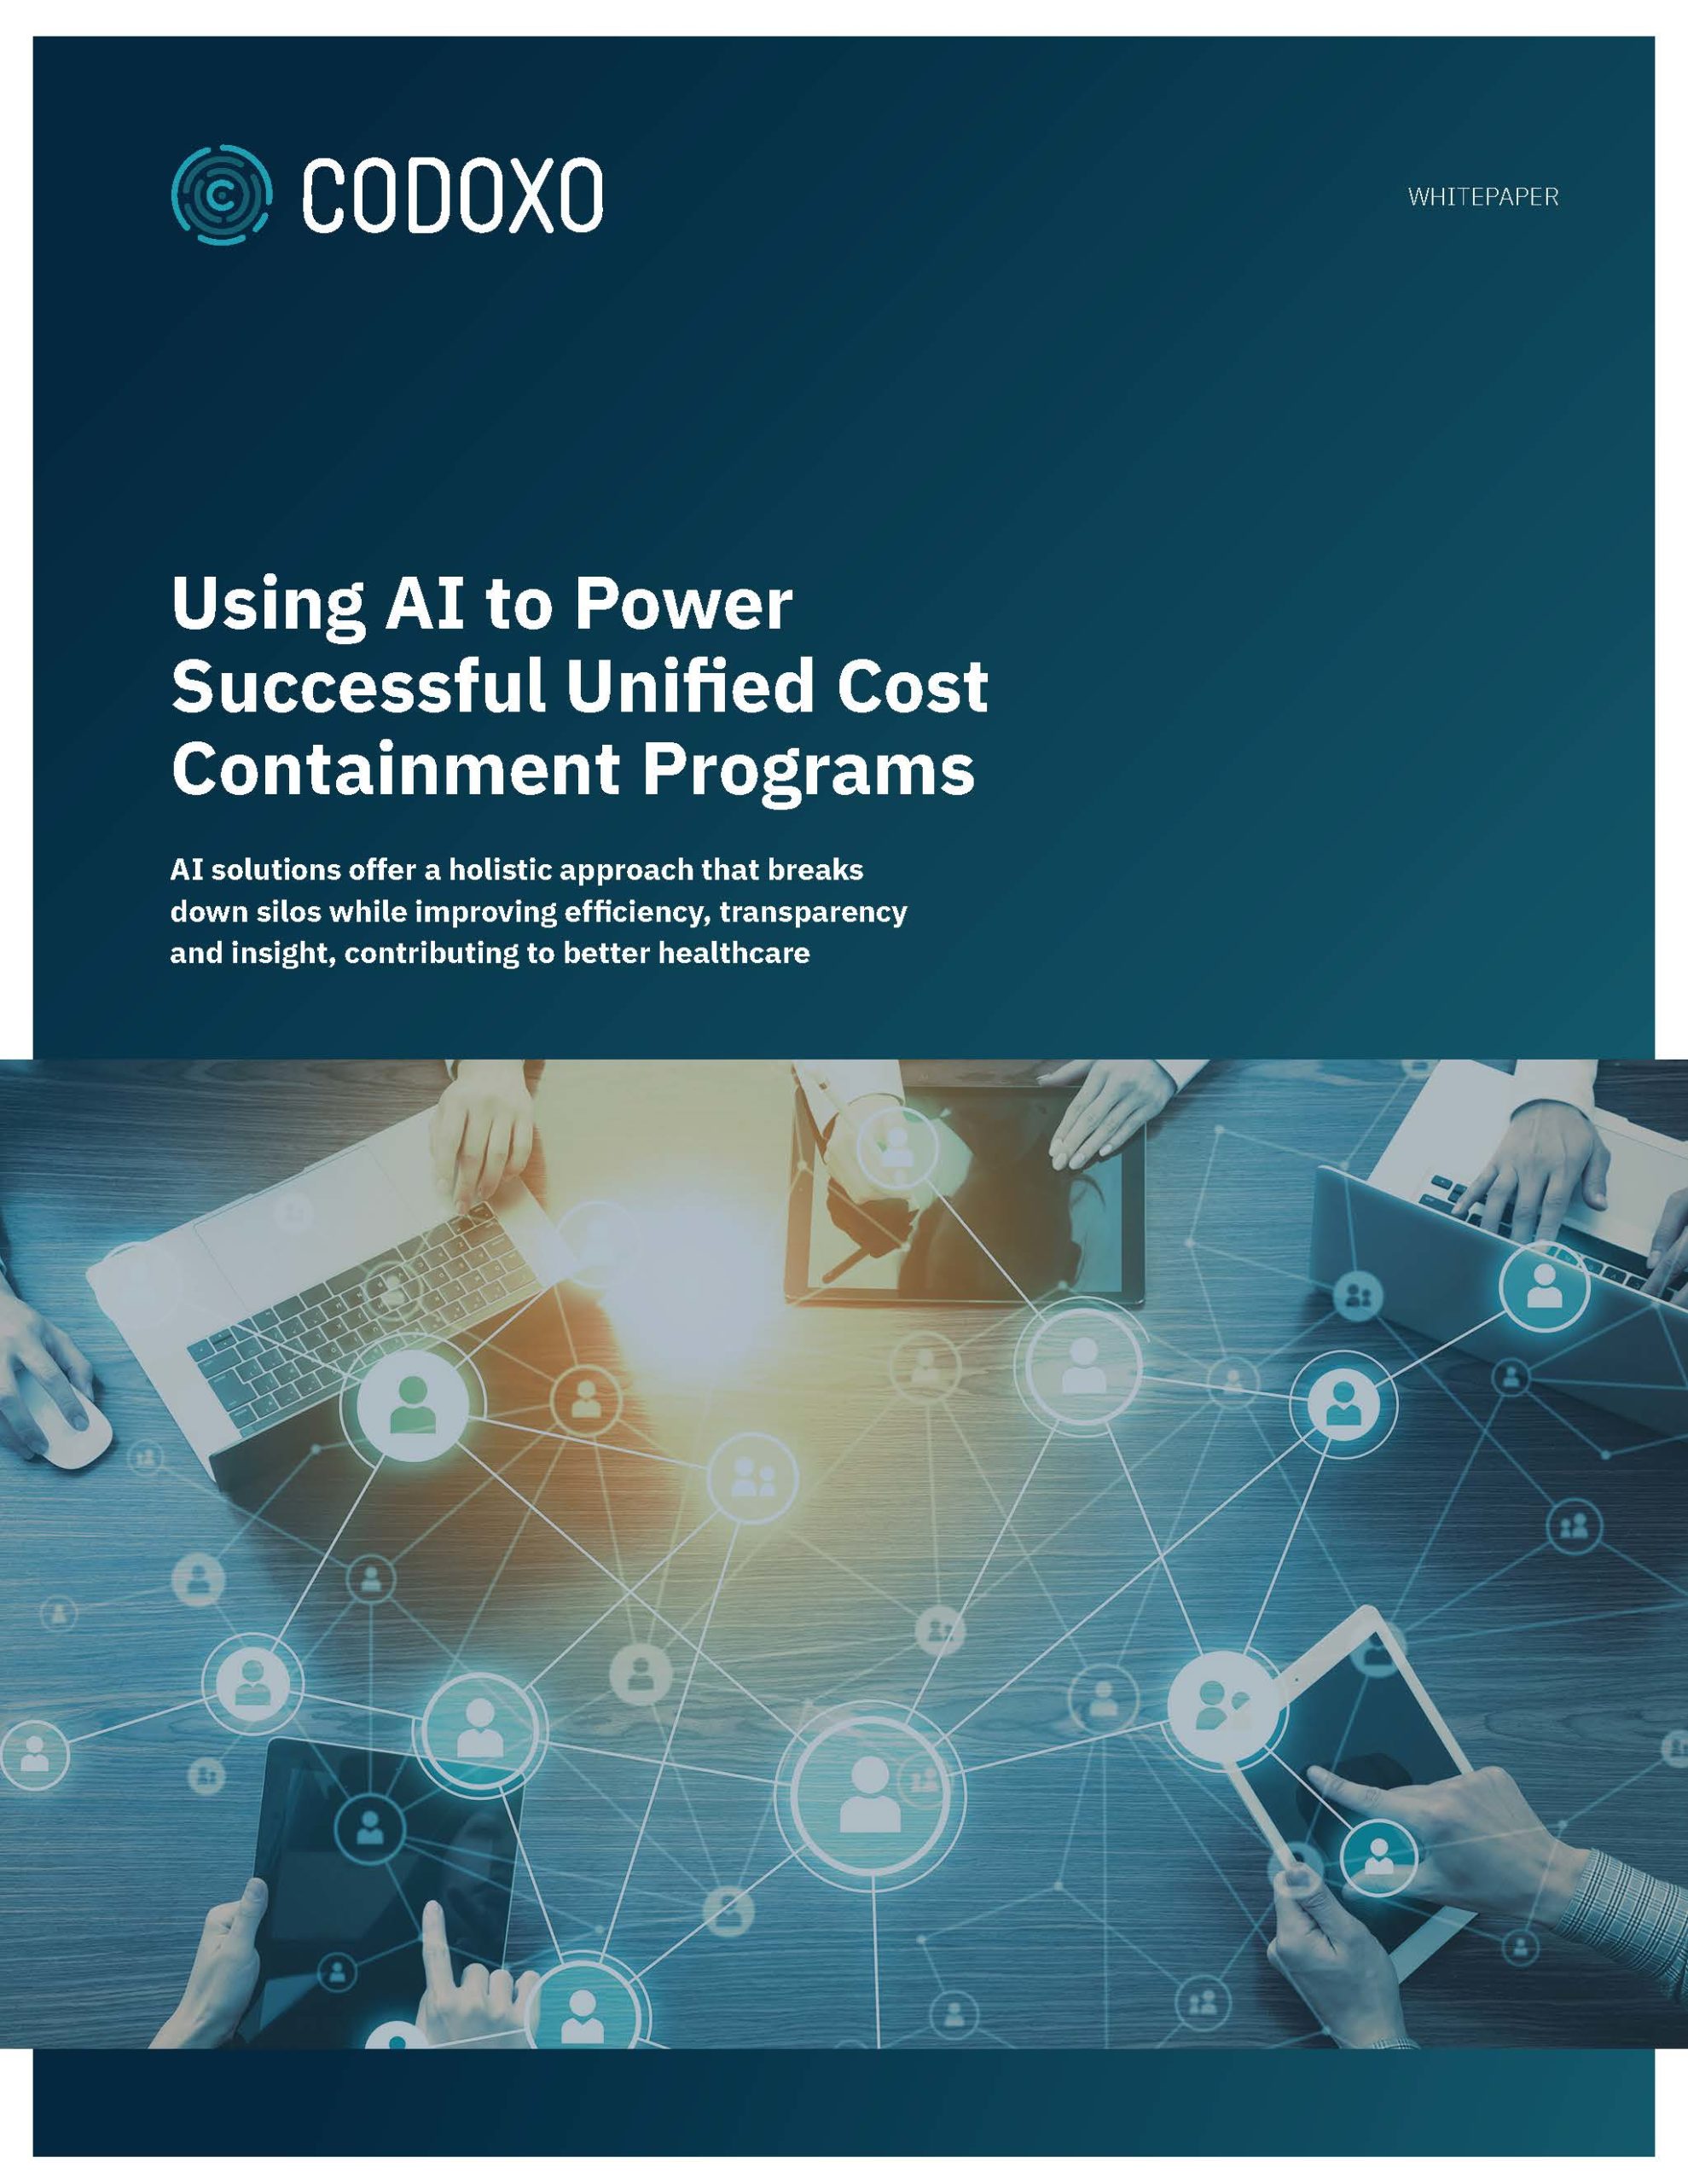 Using AI to Power Successful Unified Cost Containment Programs